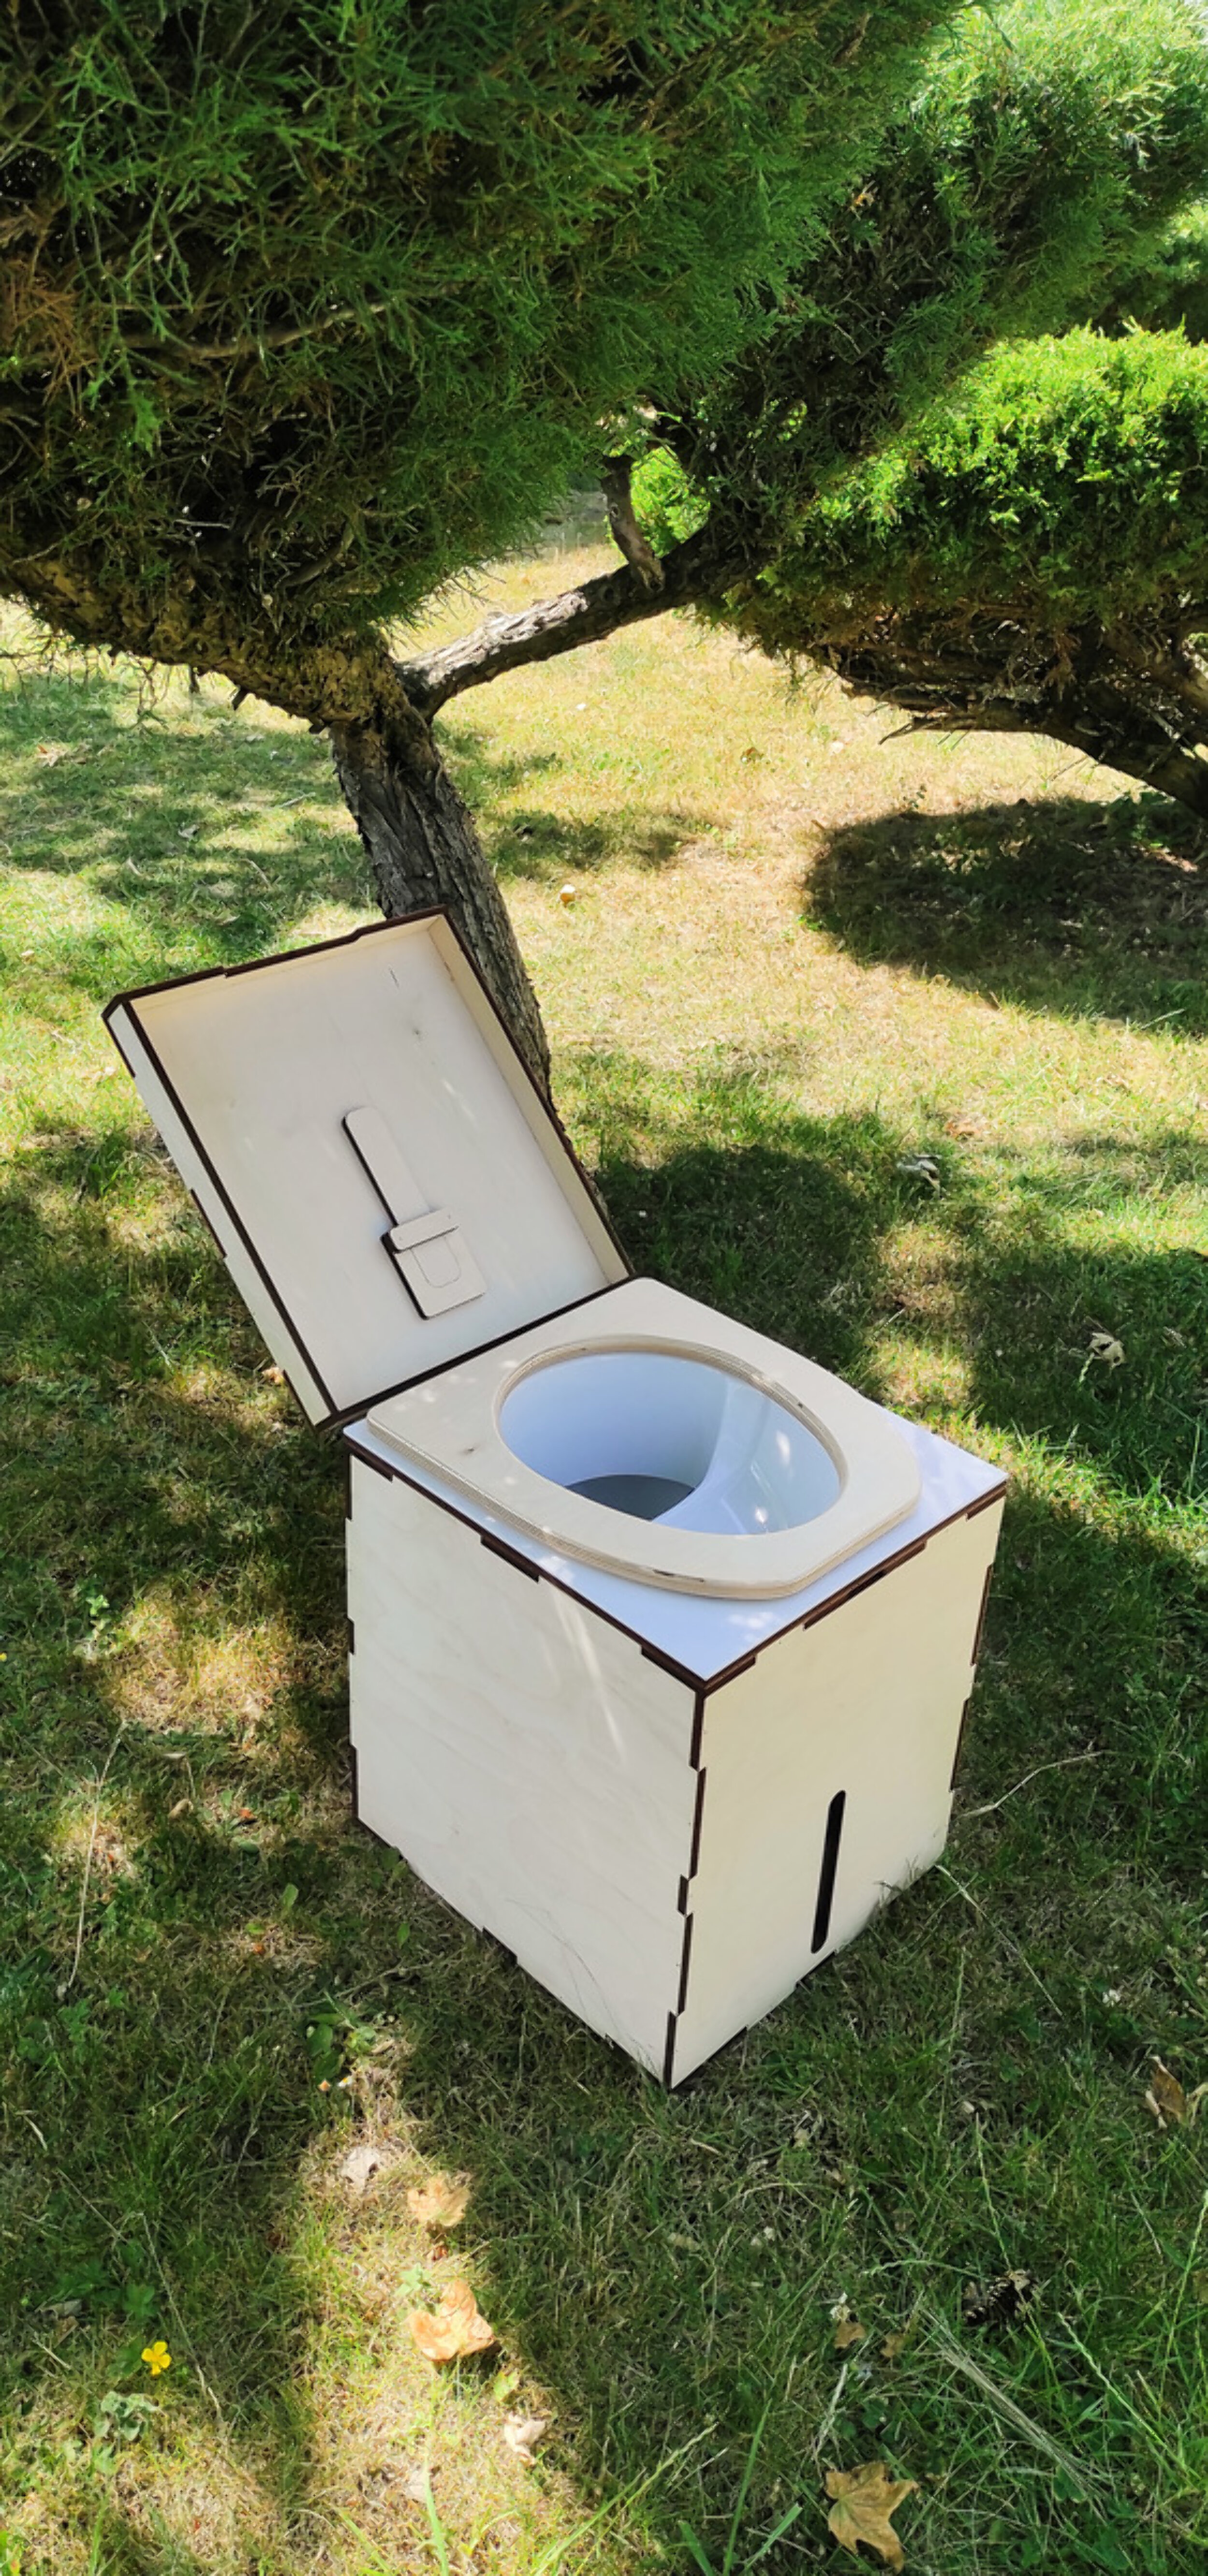 Our MiniLoo composting toilet with a white urine separator – fully assembled and ready for use